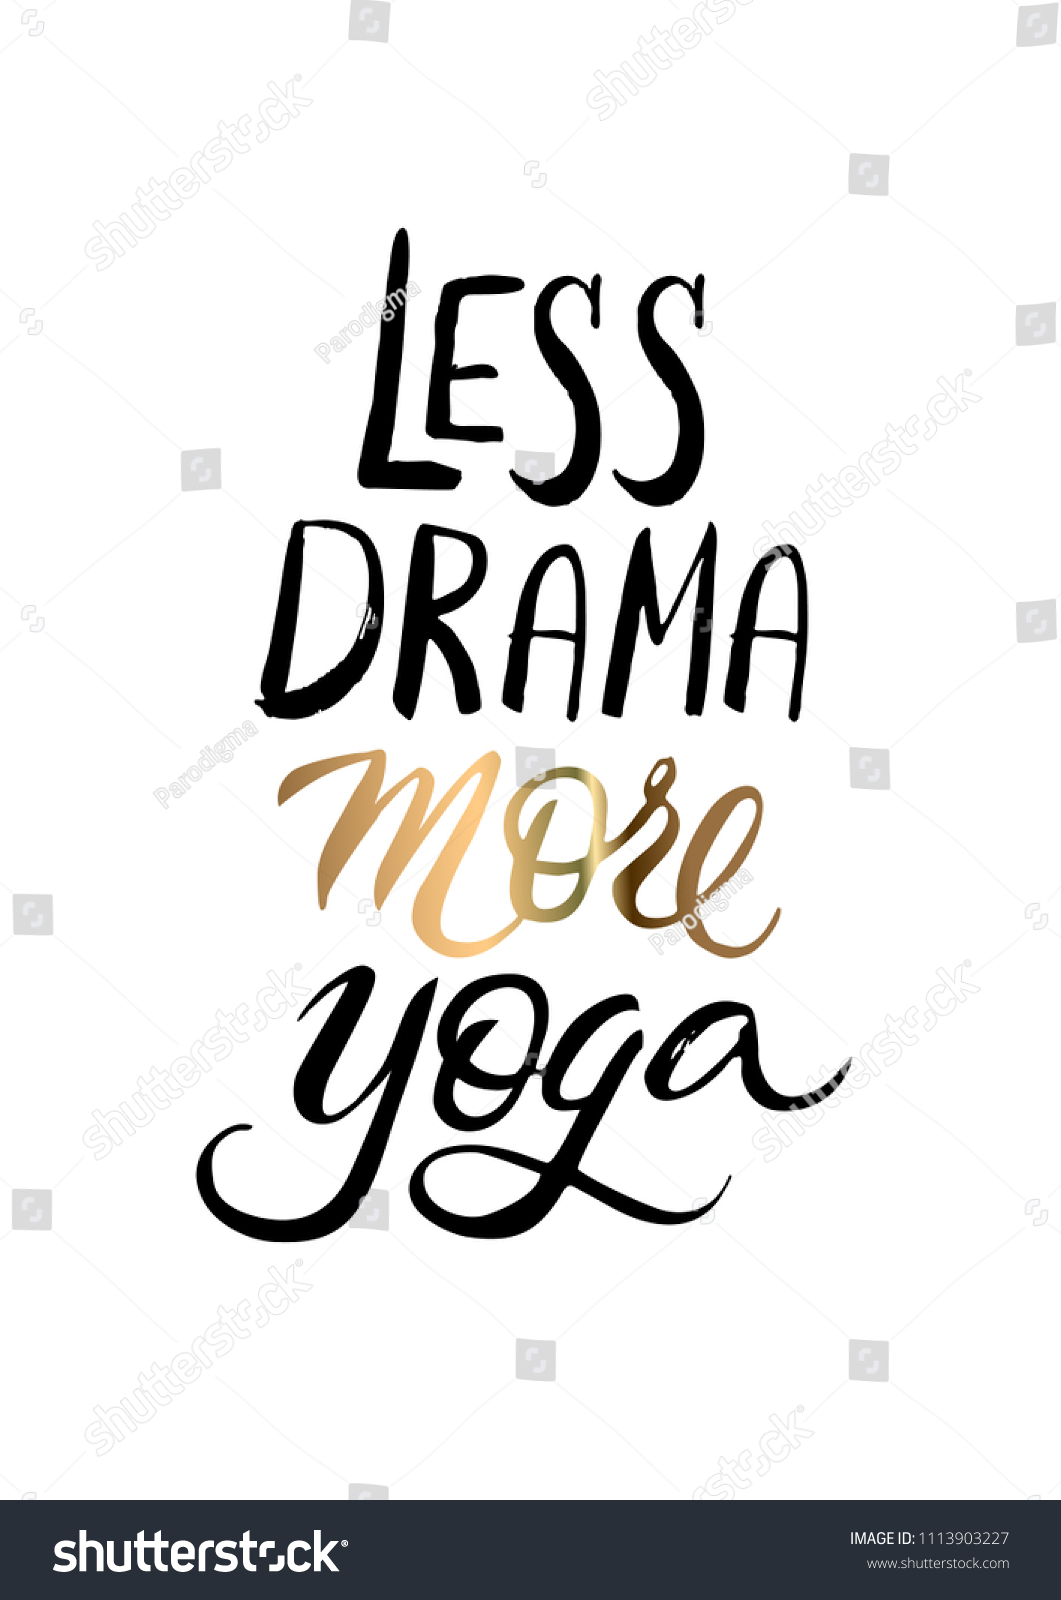 Less Drama More Yoga Quotes About Stock Vector Royalty Free